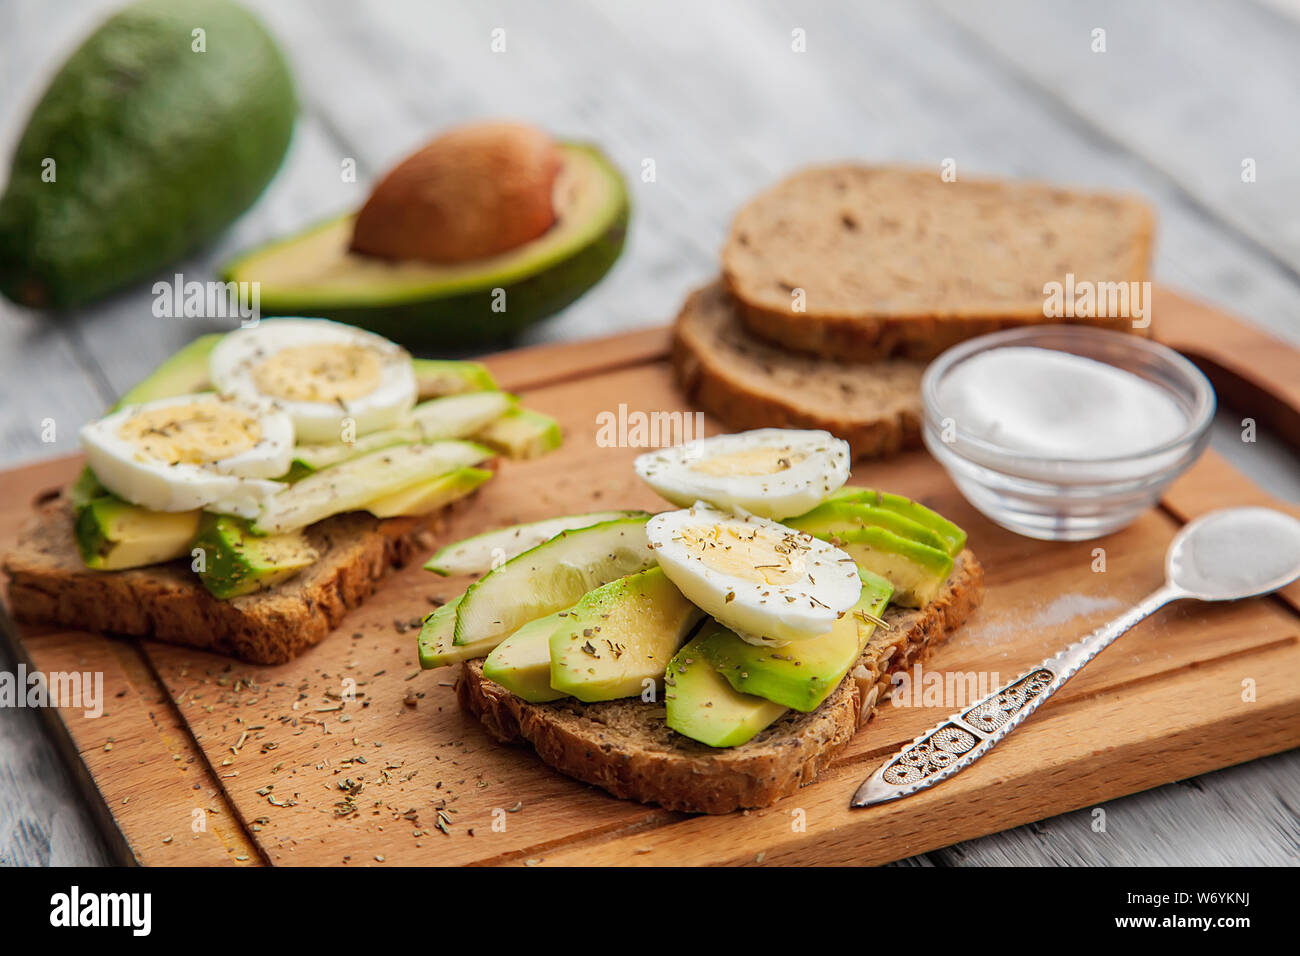 two sliced tasty avocado sandwiches with egg and spices on a wooden Board. Concept of Keto diet Stock Photo